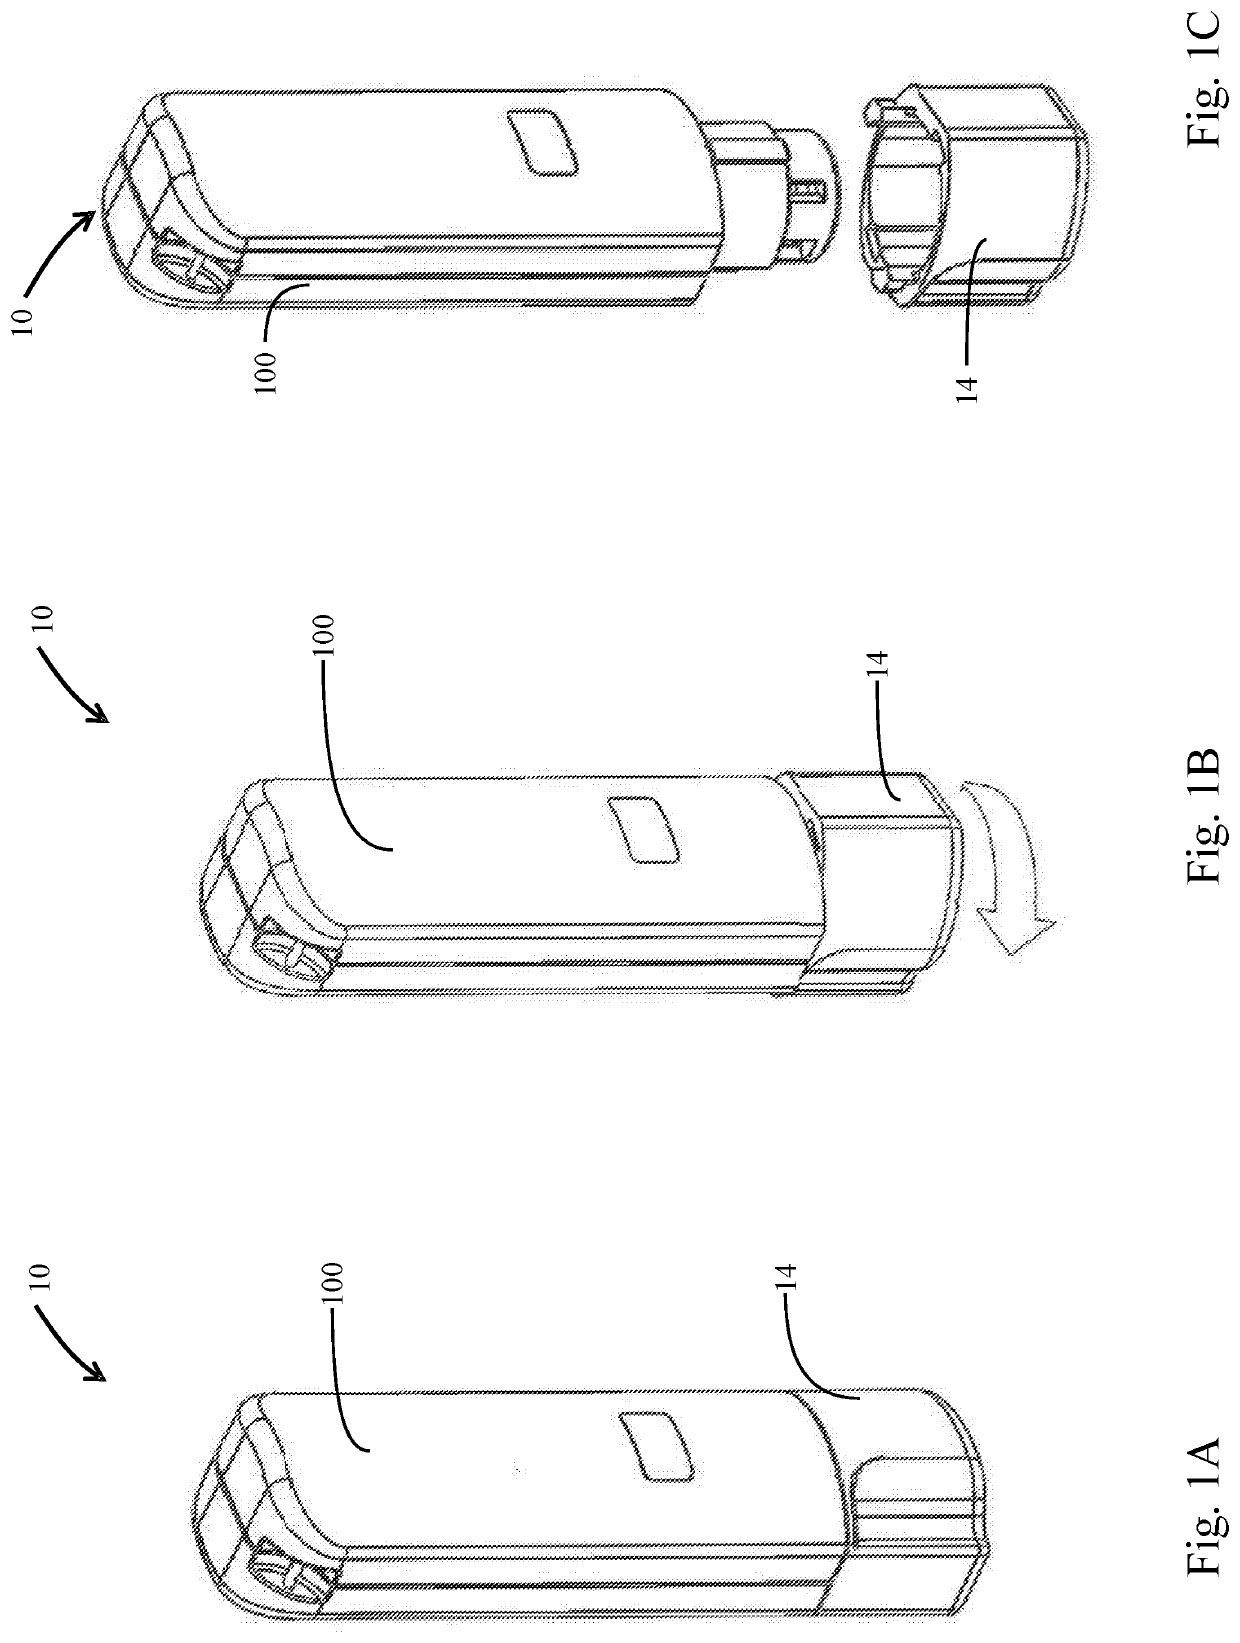 Portable drug mixing and delivery device and associated methods